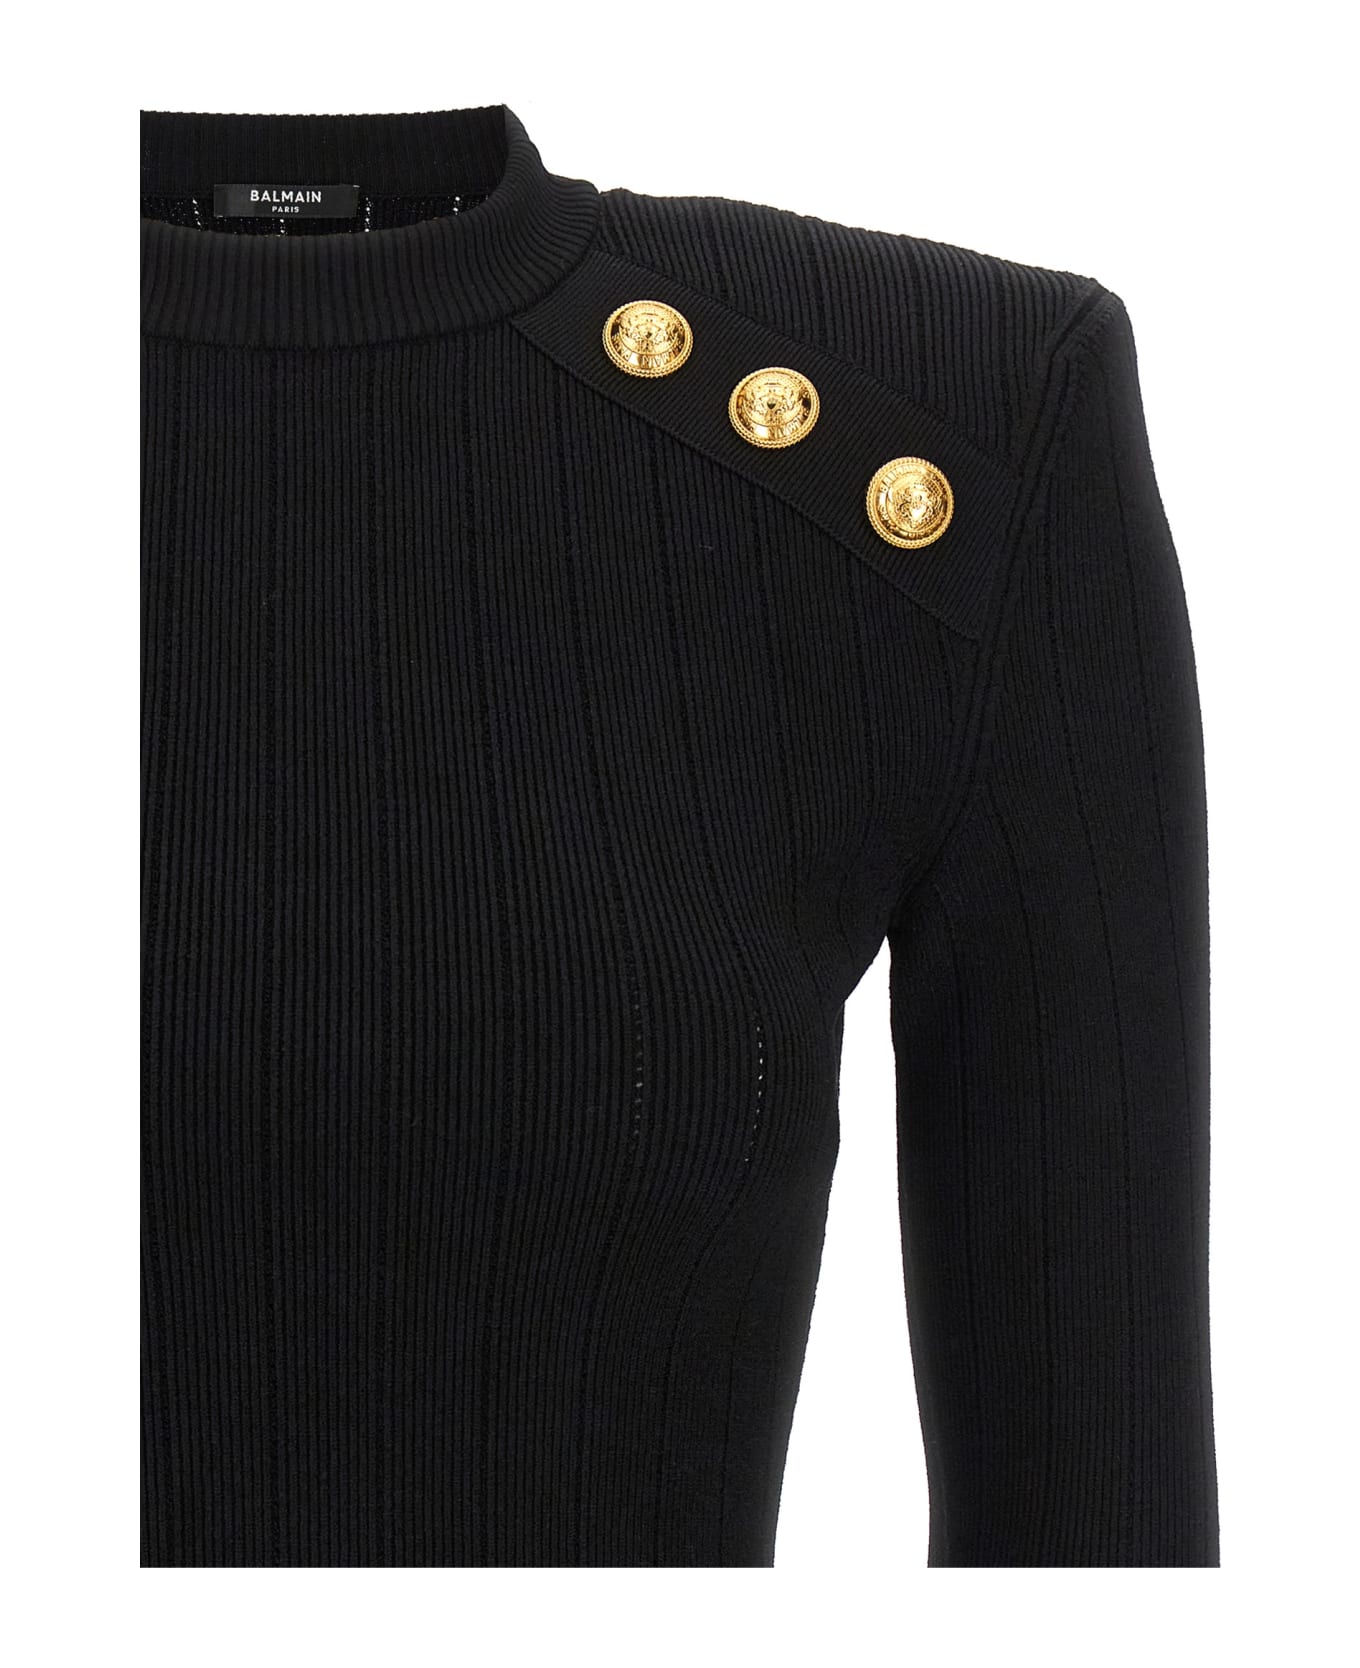 Balmain Crew-neck Sweater With Buttons - Black ニットウェア